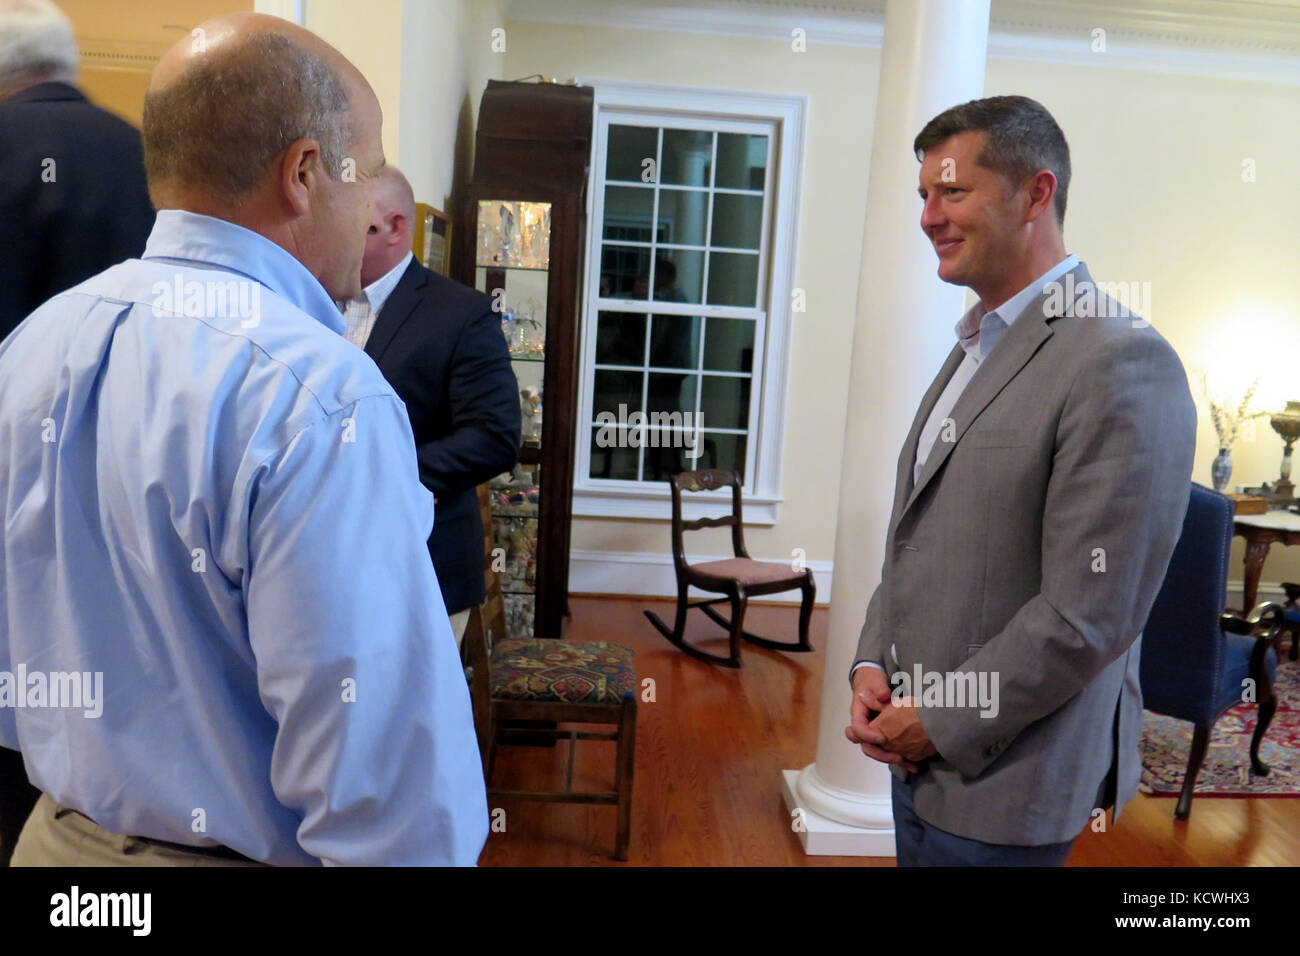 Under Secretary of the Army Mr. Patrick J. Murphy visits with U.S. Army Maj. Gen. Robert E. Livingston, Jr., the adjutant general for South Carolina at a reception in his honor during his visit to South Carolina in West Columbia, South Carolina, September 28, 2016. The Under Secretary was in the state to meet with Soldiers in the South Carolina Army National Guard, Fort Jackson, U.S. Army Central Command and cadets from the Citadel. (U.S. Army National Guard photo by Lt. Col. Cindi King) Stock Photo